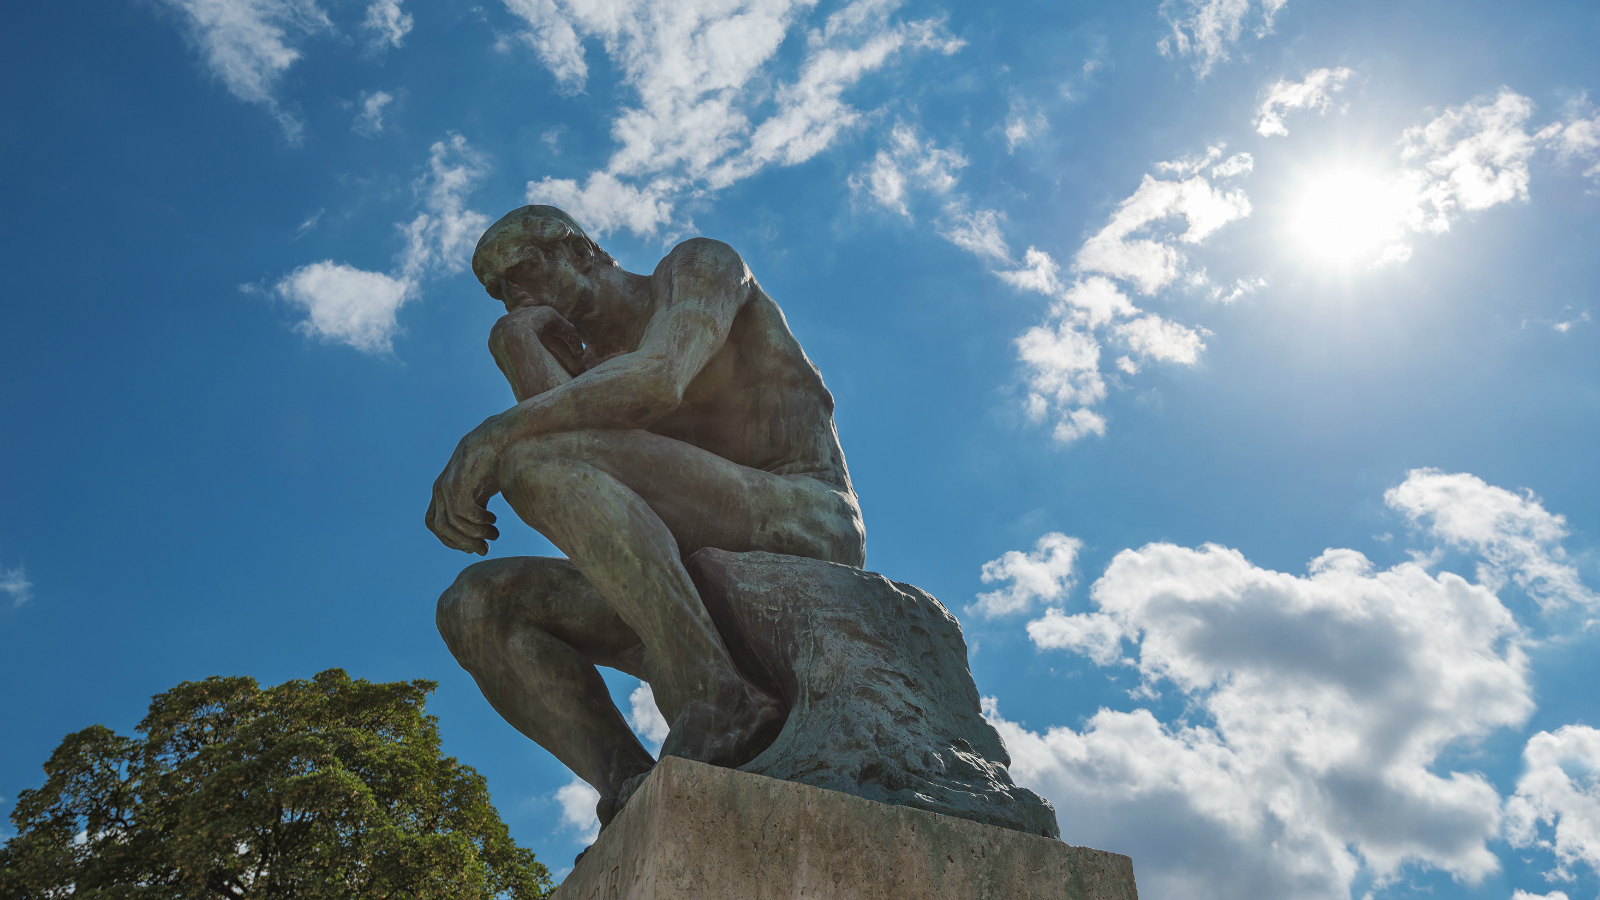 The Thinker statue by Rodin